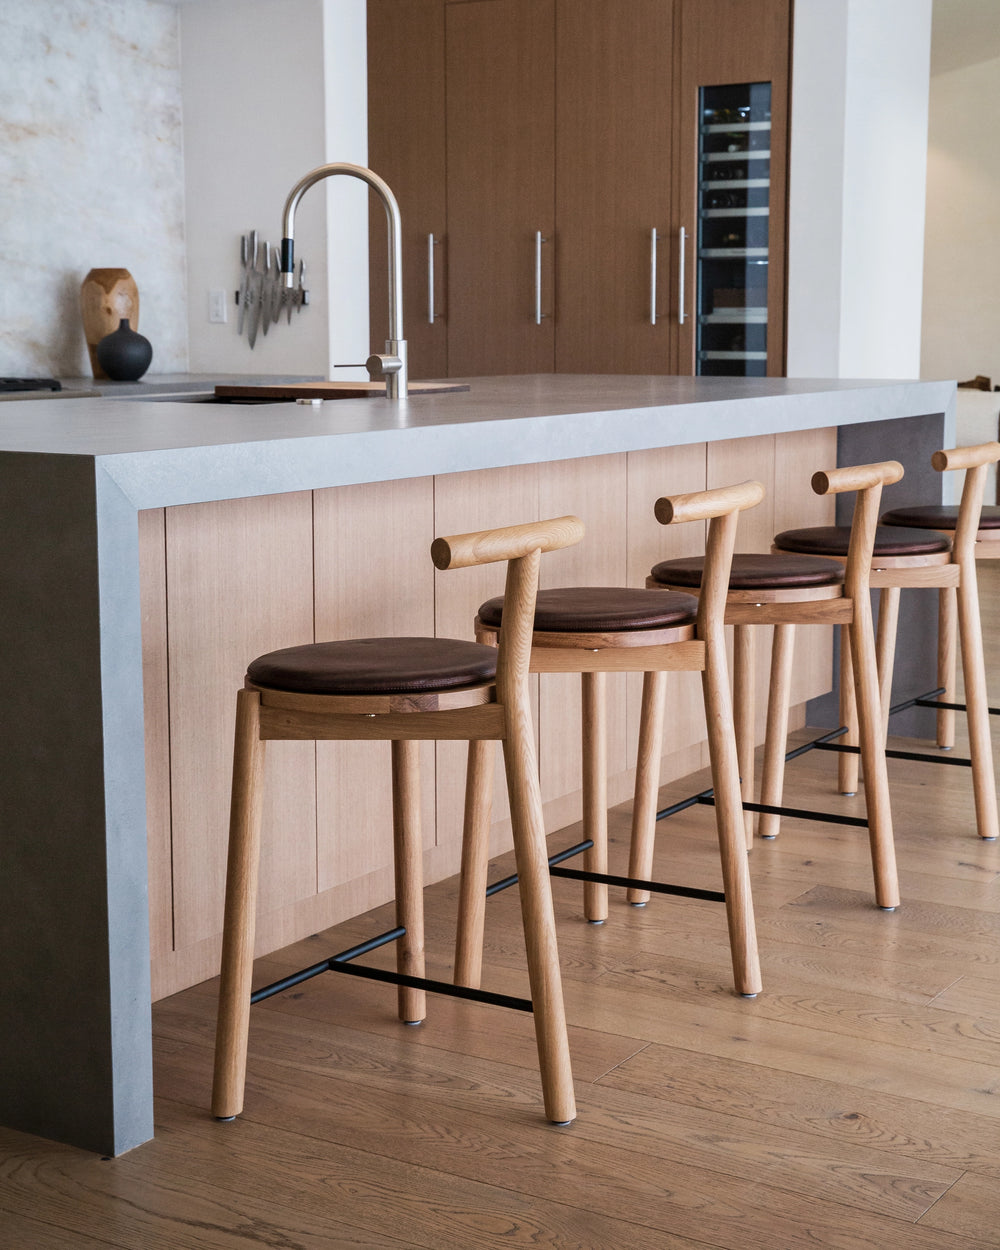 A minimalist kitchen interior featuring three Range Counter Stools in front of a kitchen island. The stools have a natural maple wood finish with slim legs, black footrests, and round leather cushions. 